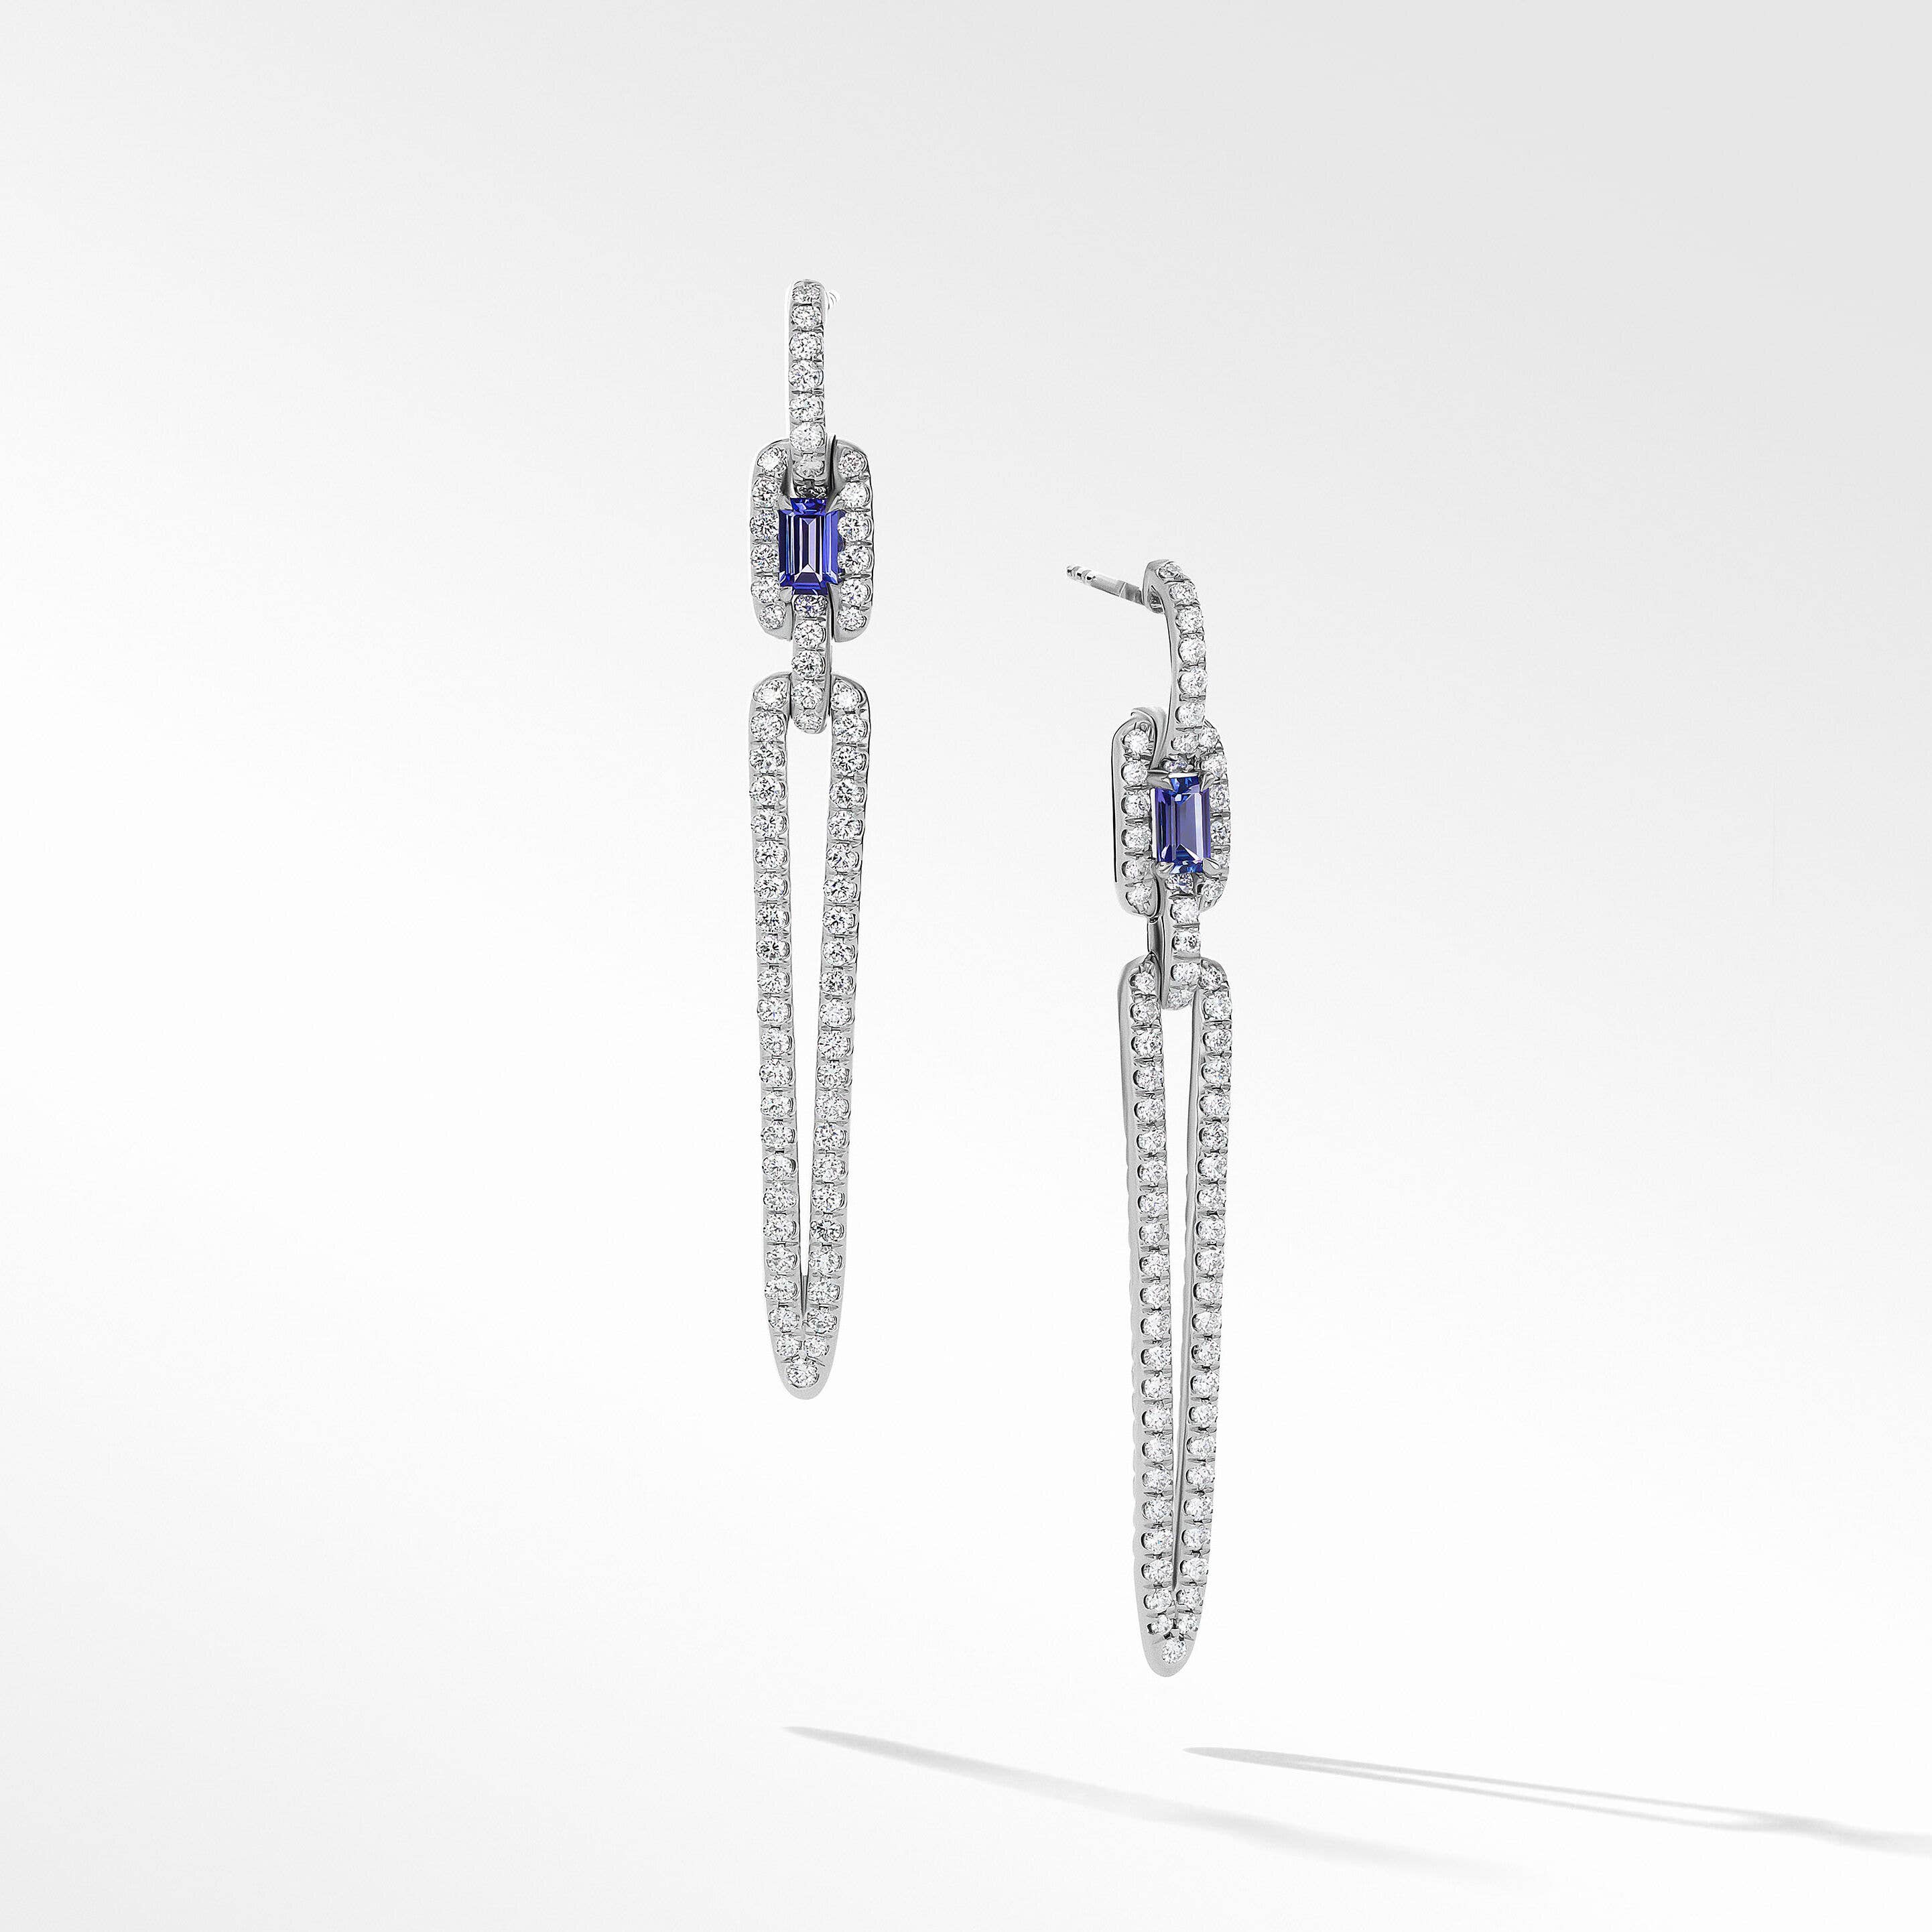 Stax Elongated Drop Earrings in 18K White Gold with Pavé Diamonds and Tanzanite